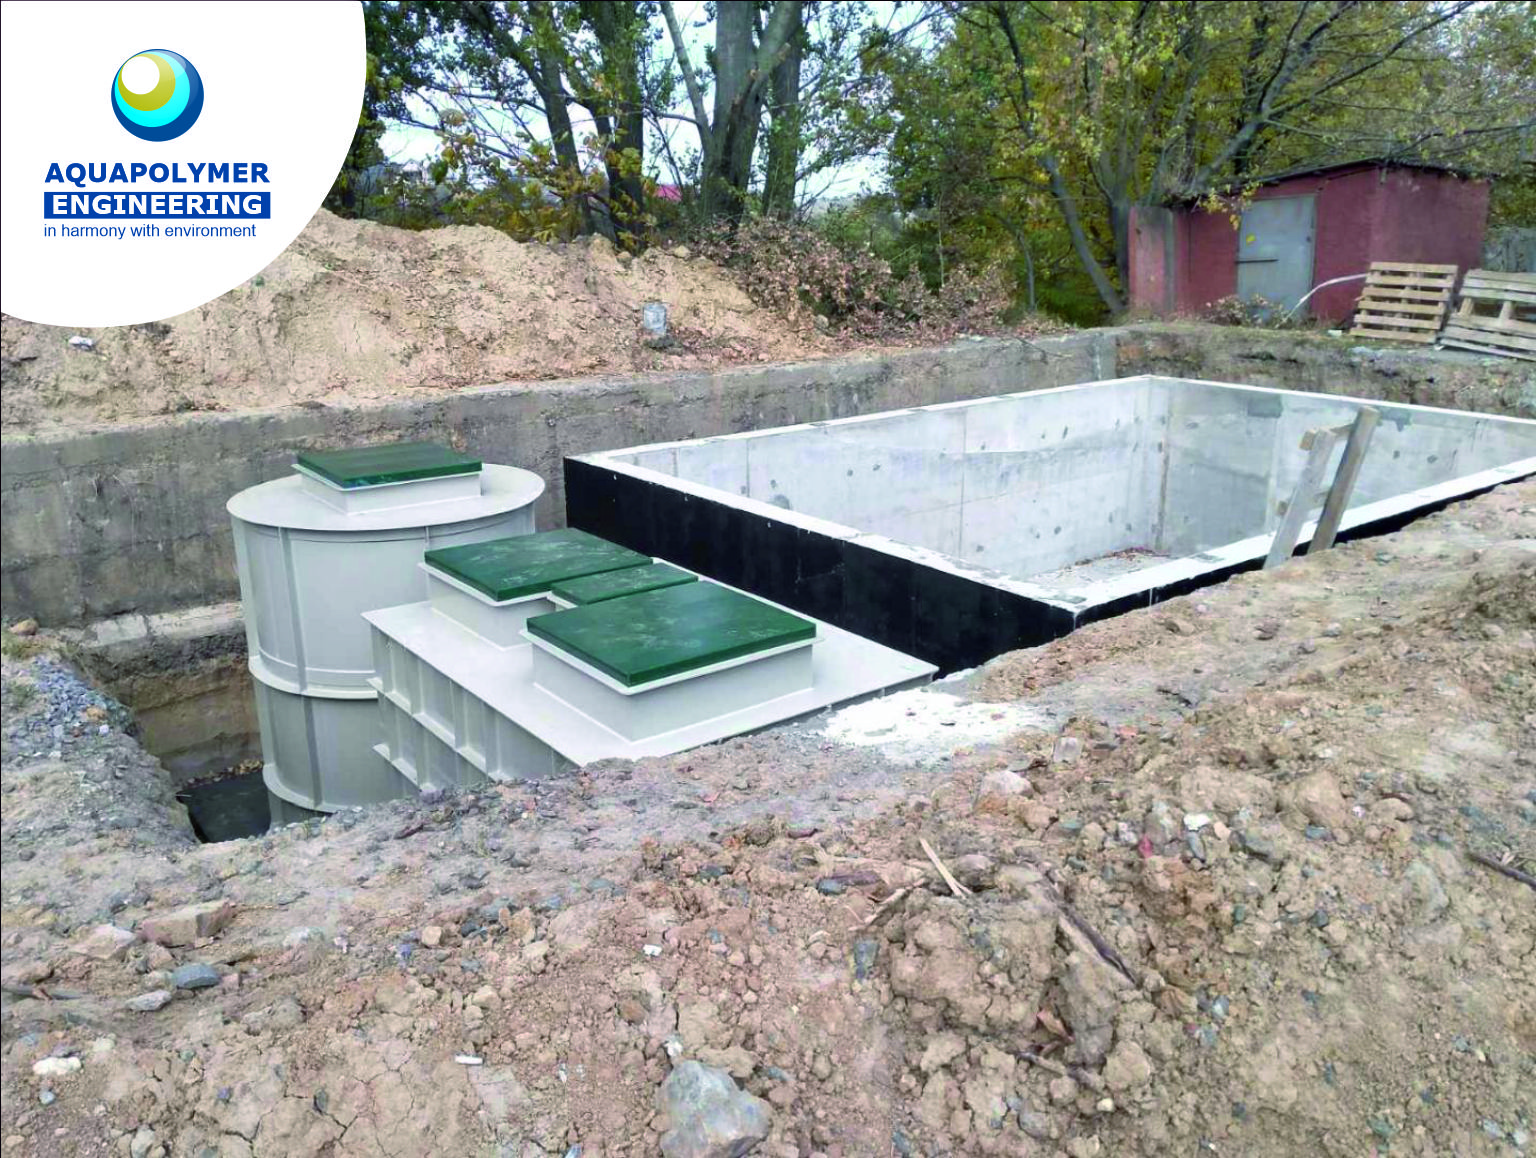 sewage-treatment-facilities-with-unit-after-treatment-and-tank-for-treatment-water